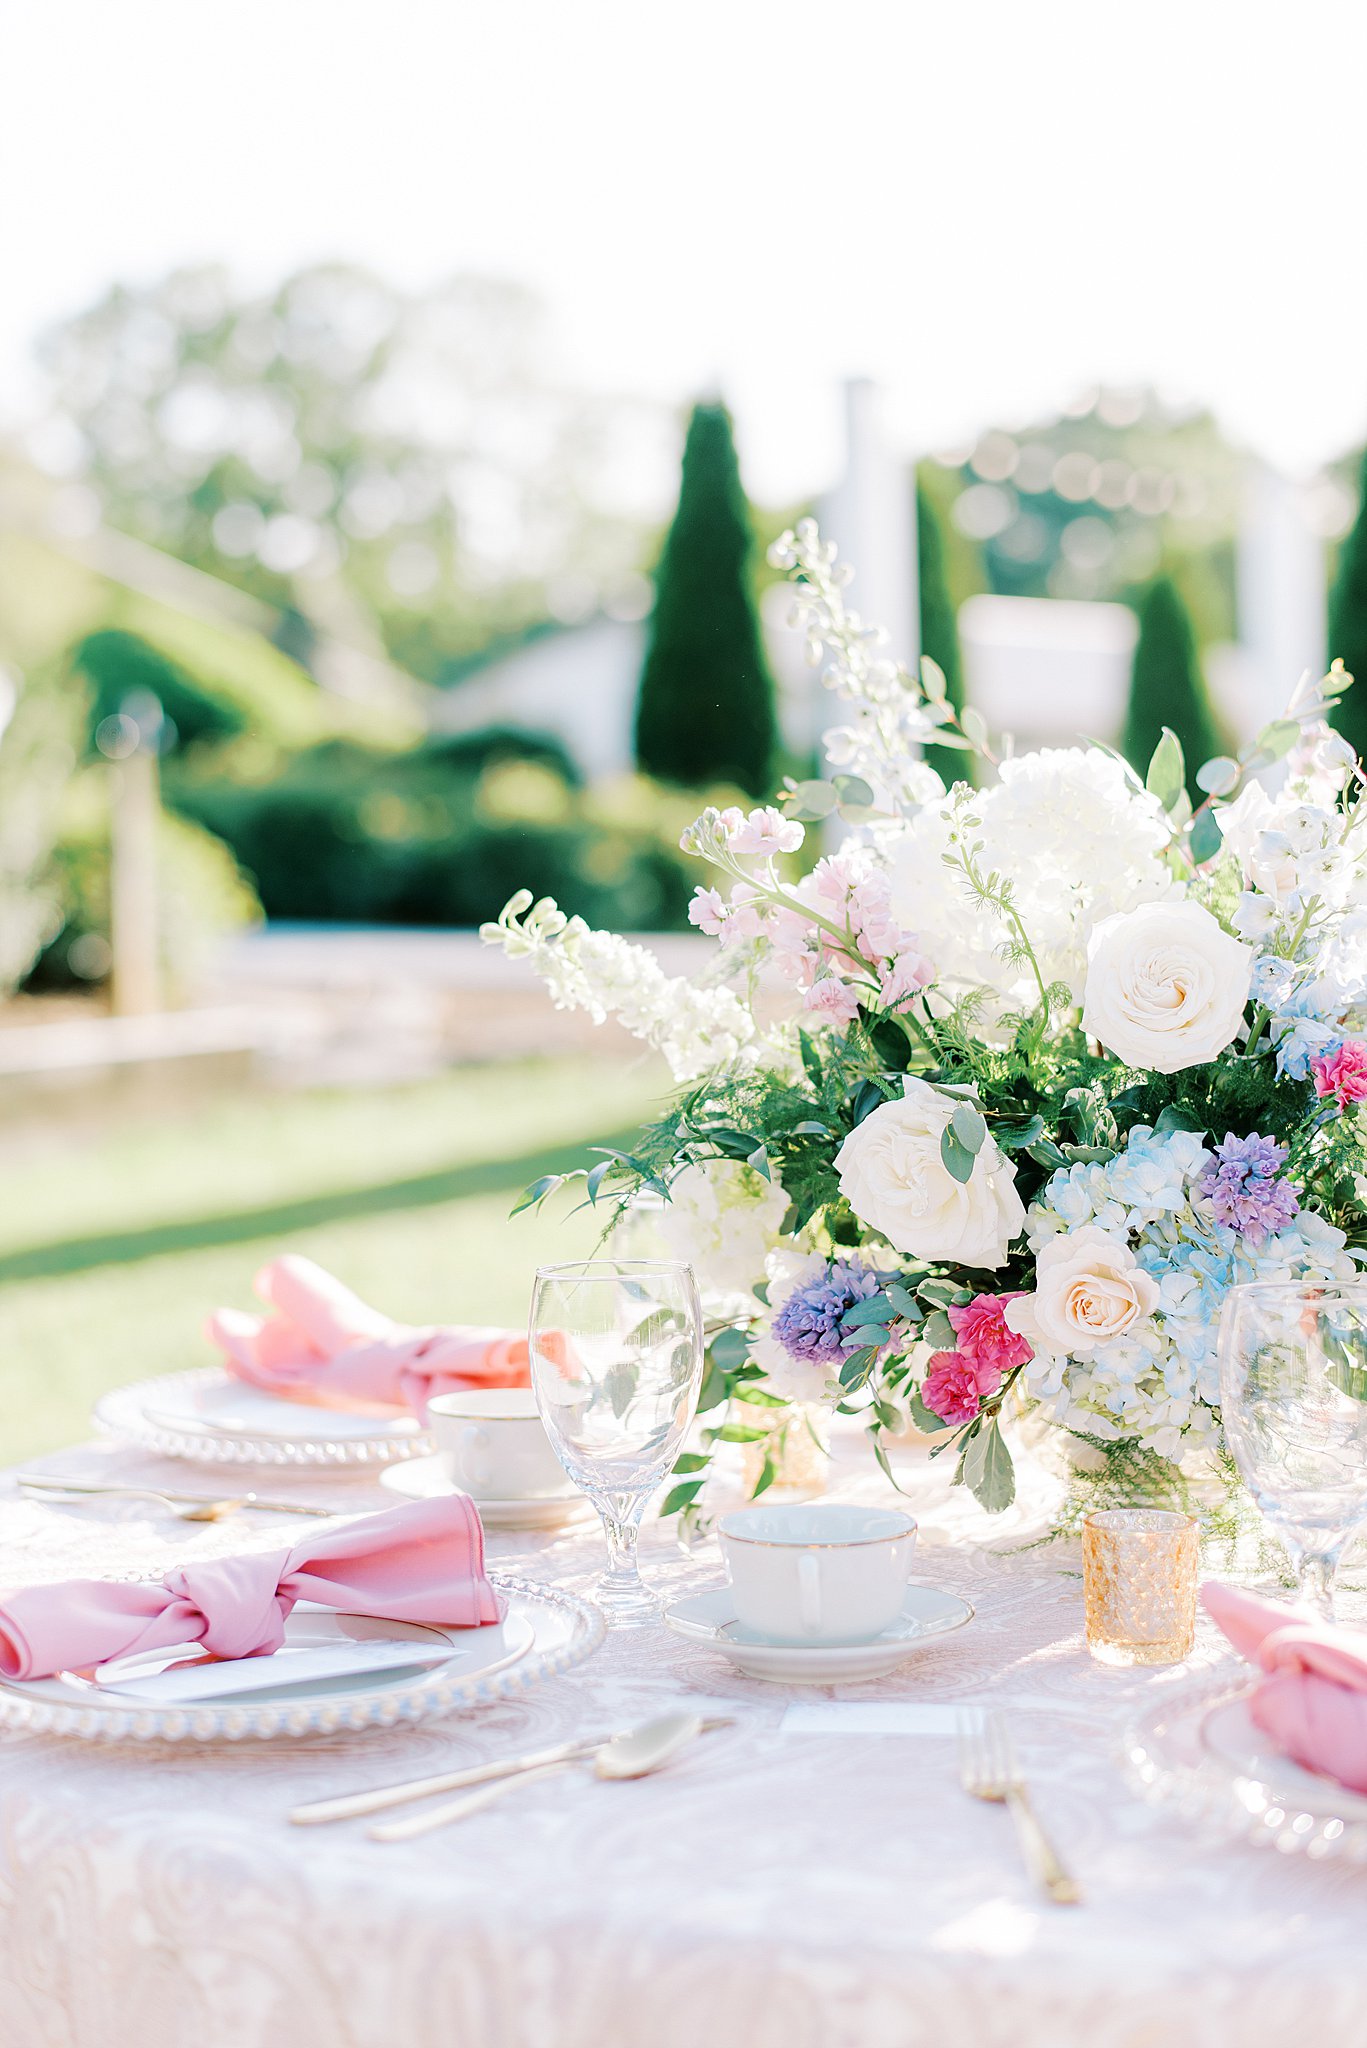 Details of an outdoor wedding reception table complete with flowers and pink linens